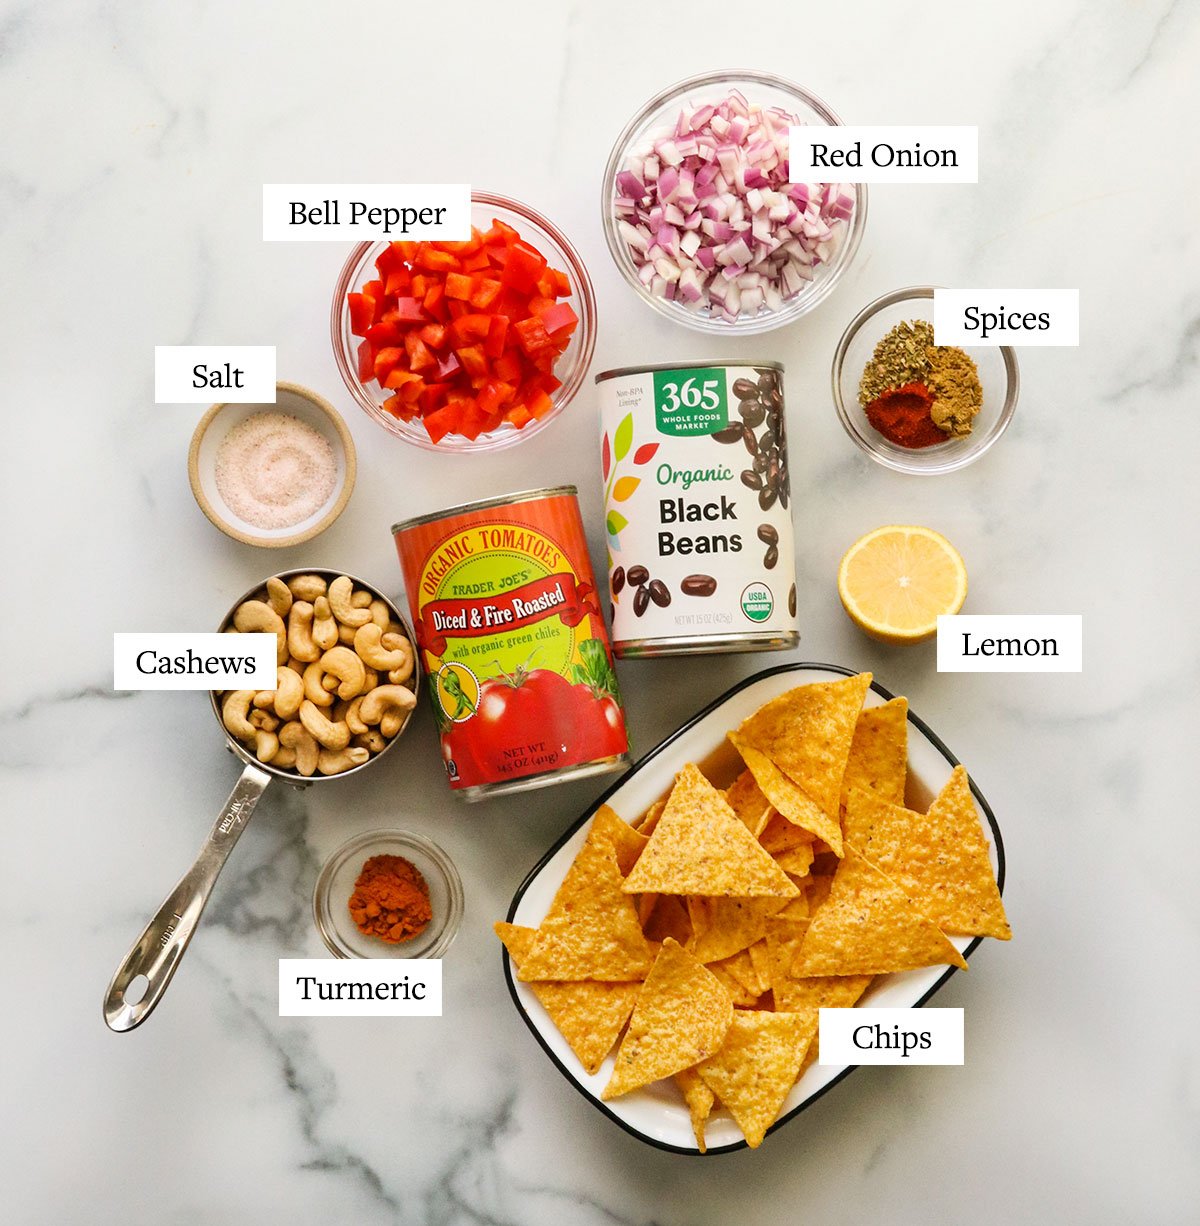 vegan nacho ingredients labeled on a marble surface.